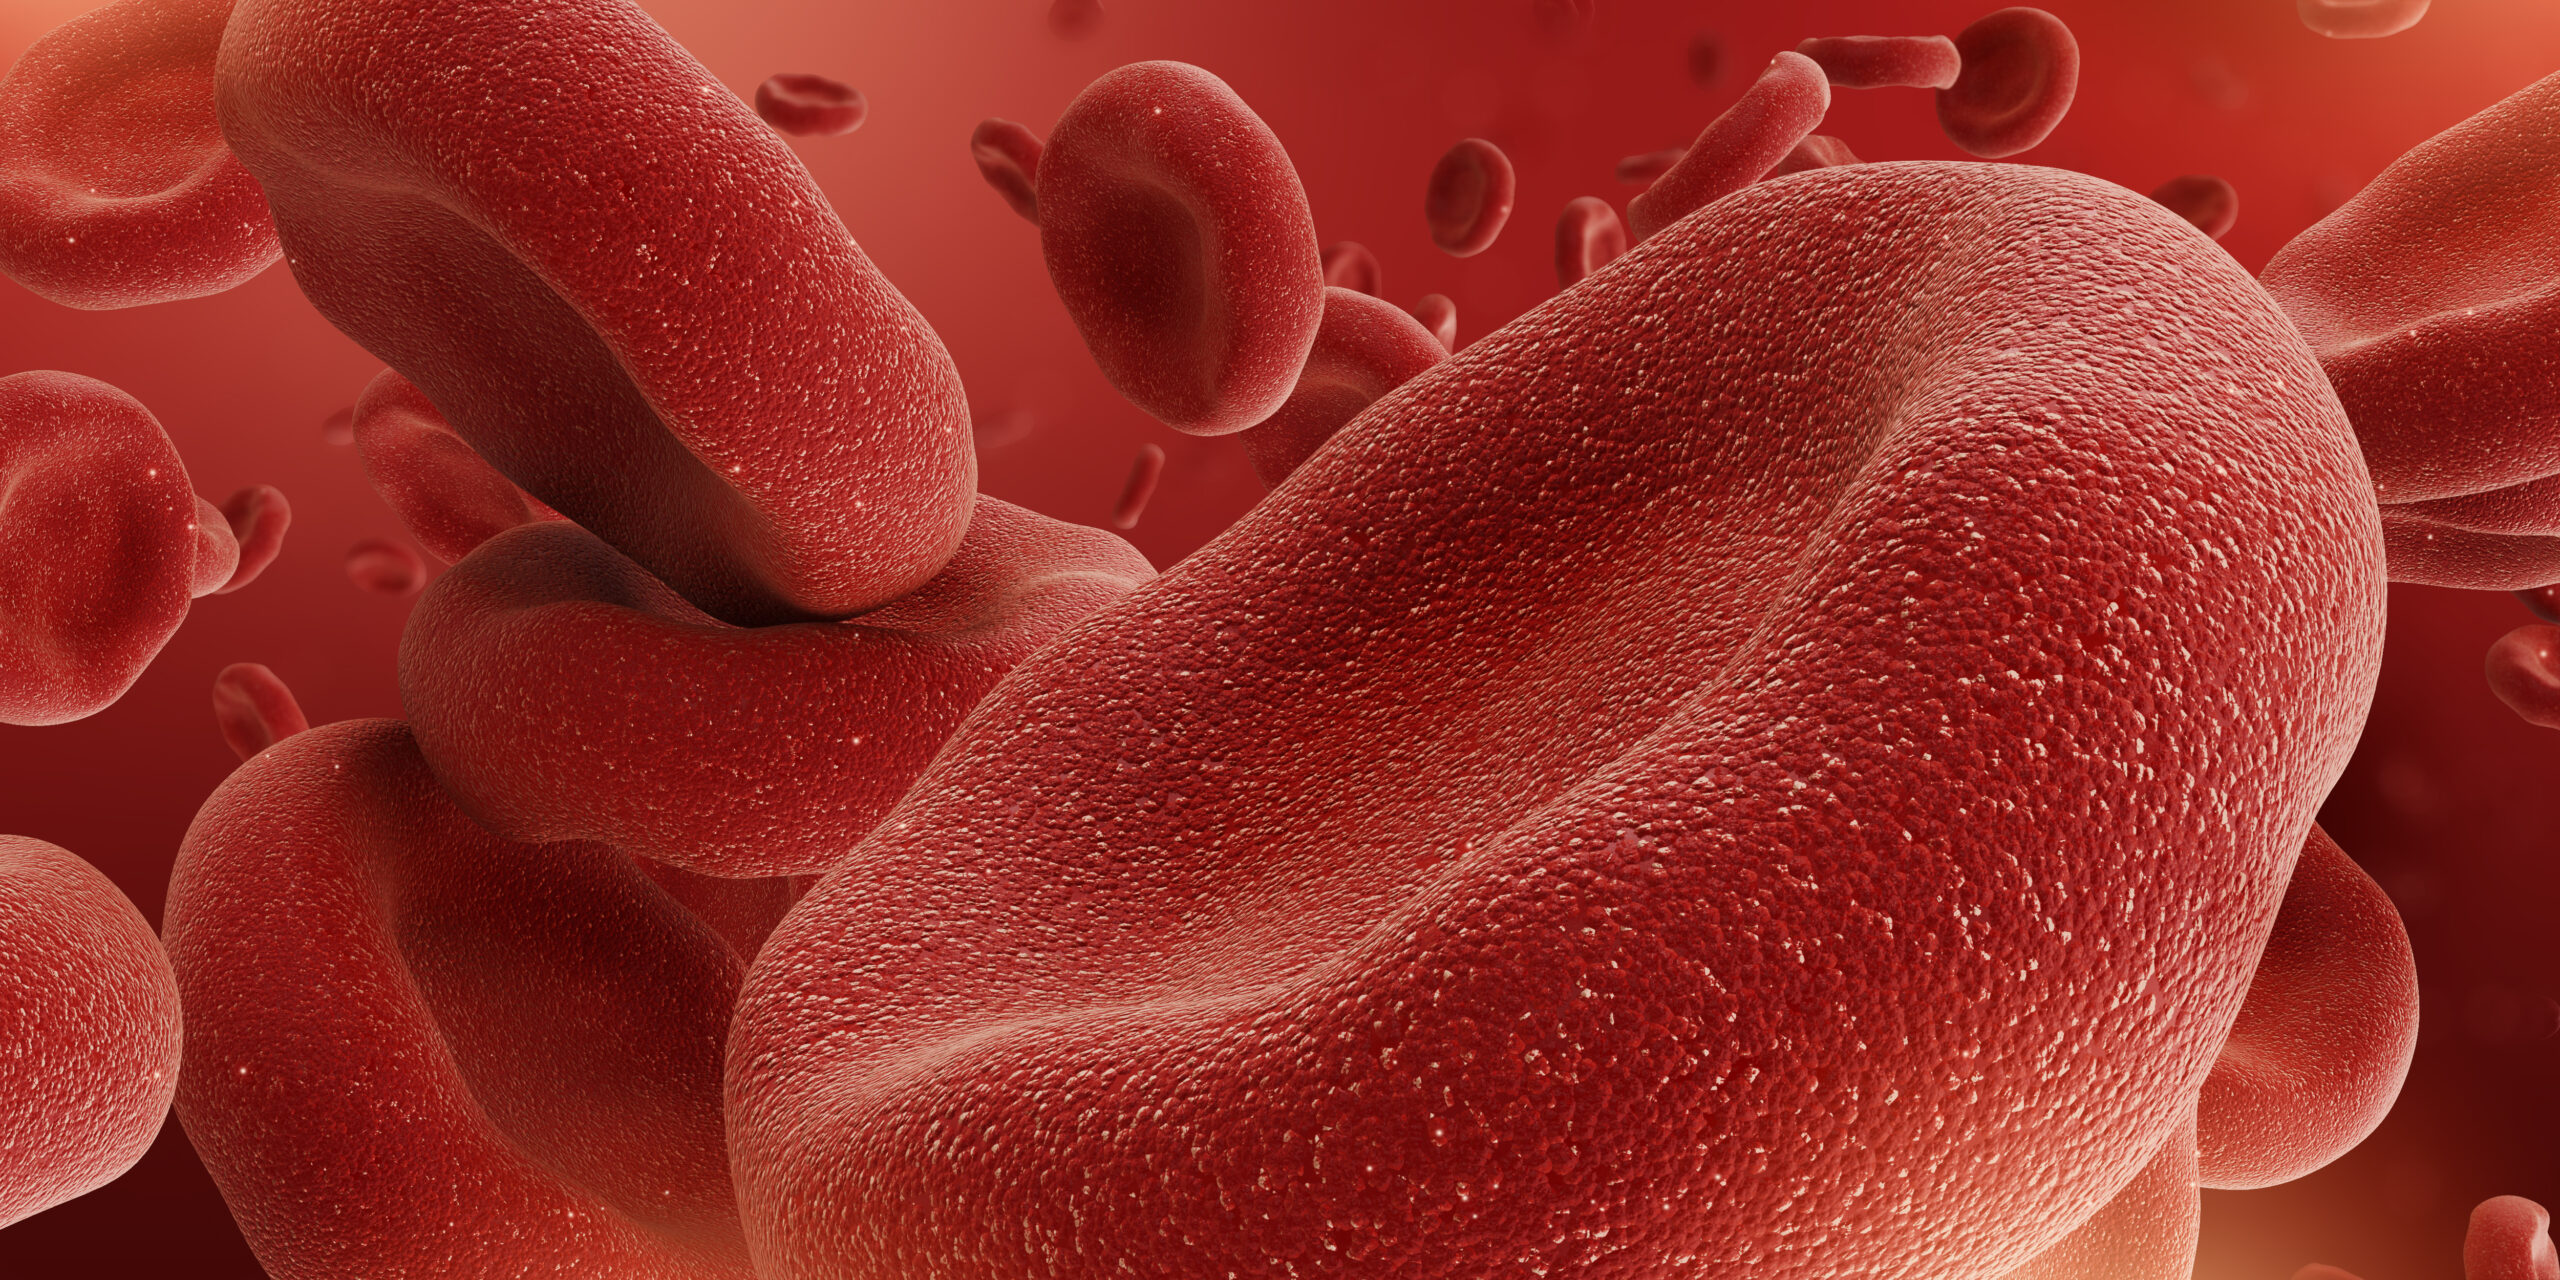 Image of blood cells. EBOO is a form of ozone therapy that filters treats the blood with medical-grade ozone.